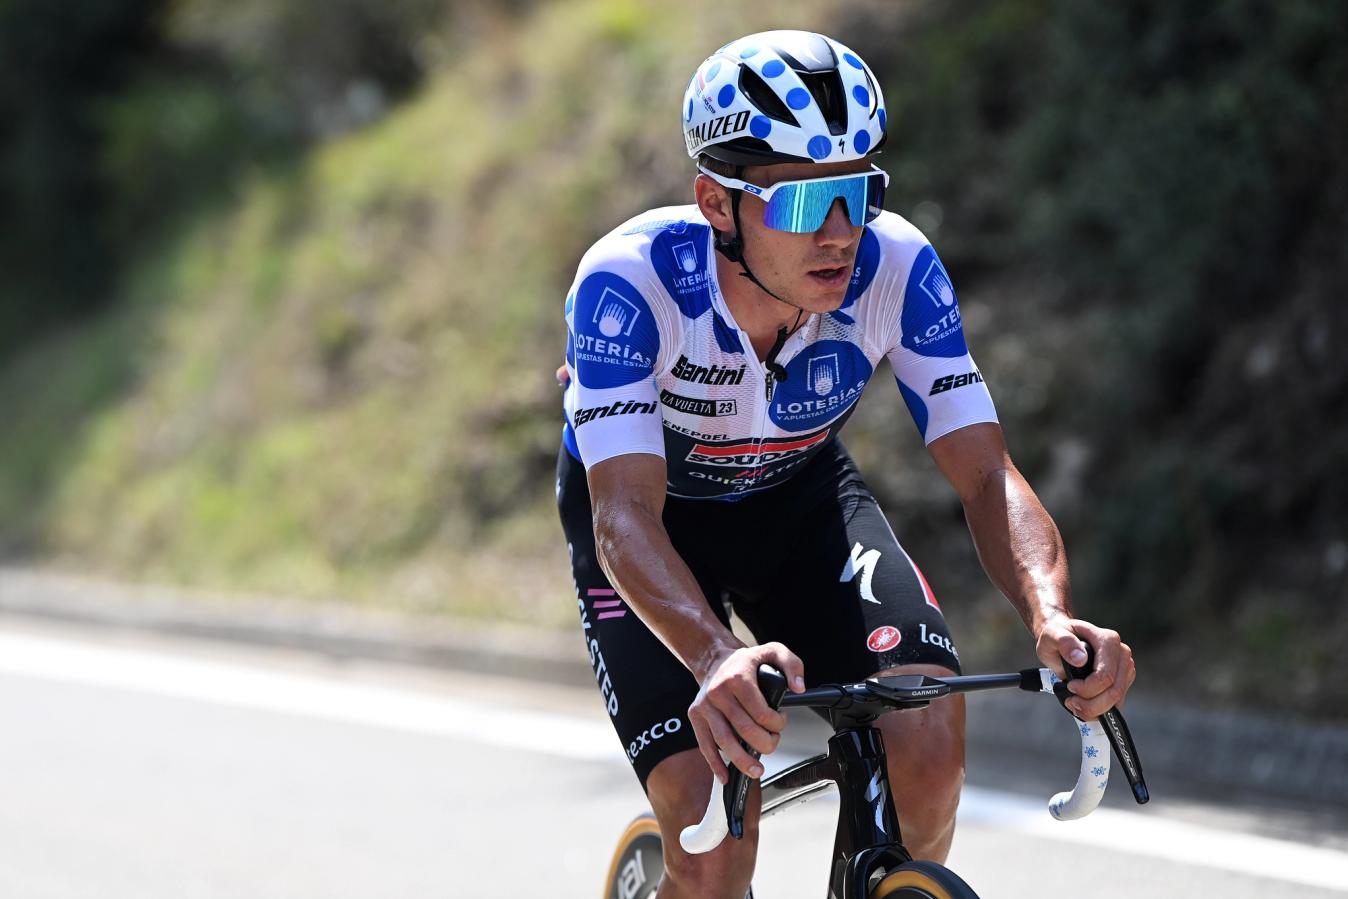 The polka-dot jersey is Remco Evenepoel's latest number at this year's Vuelta a España